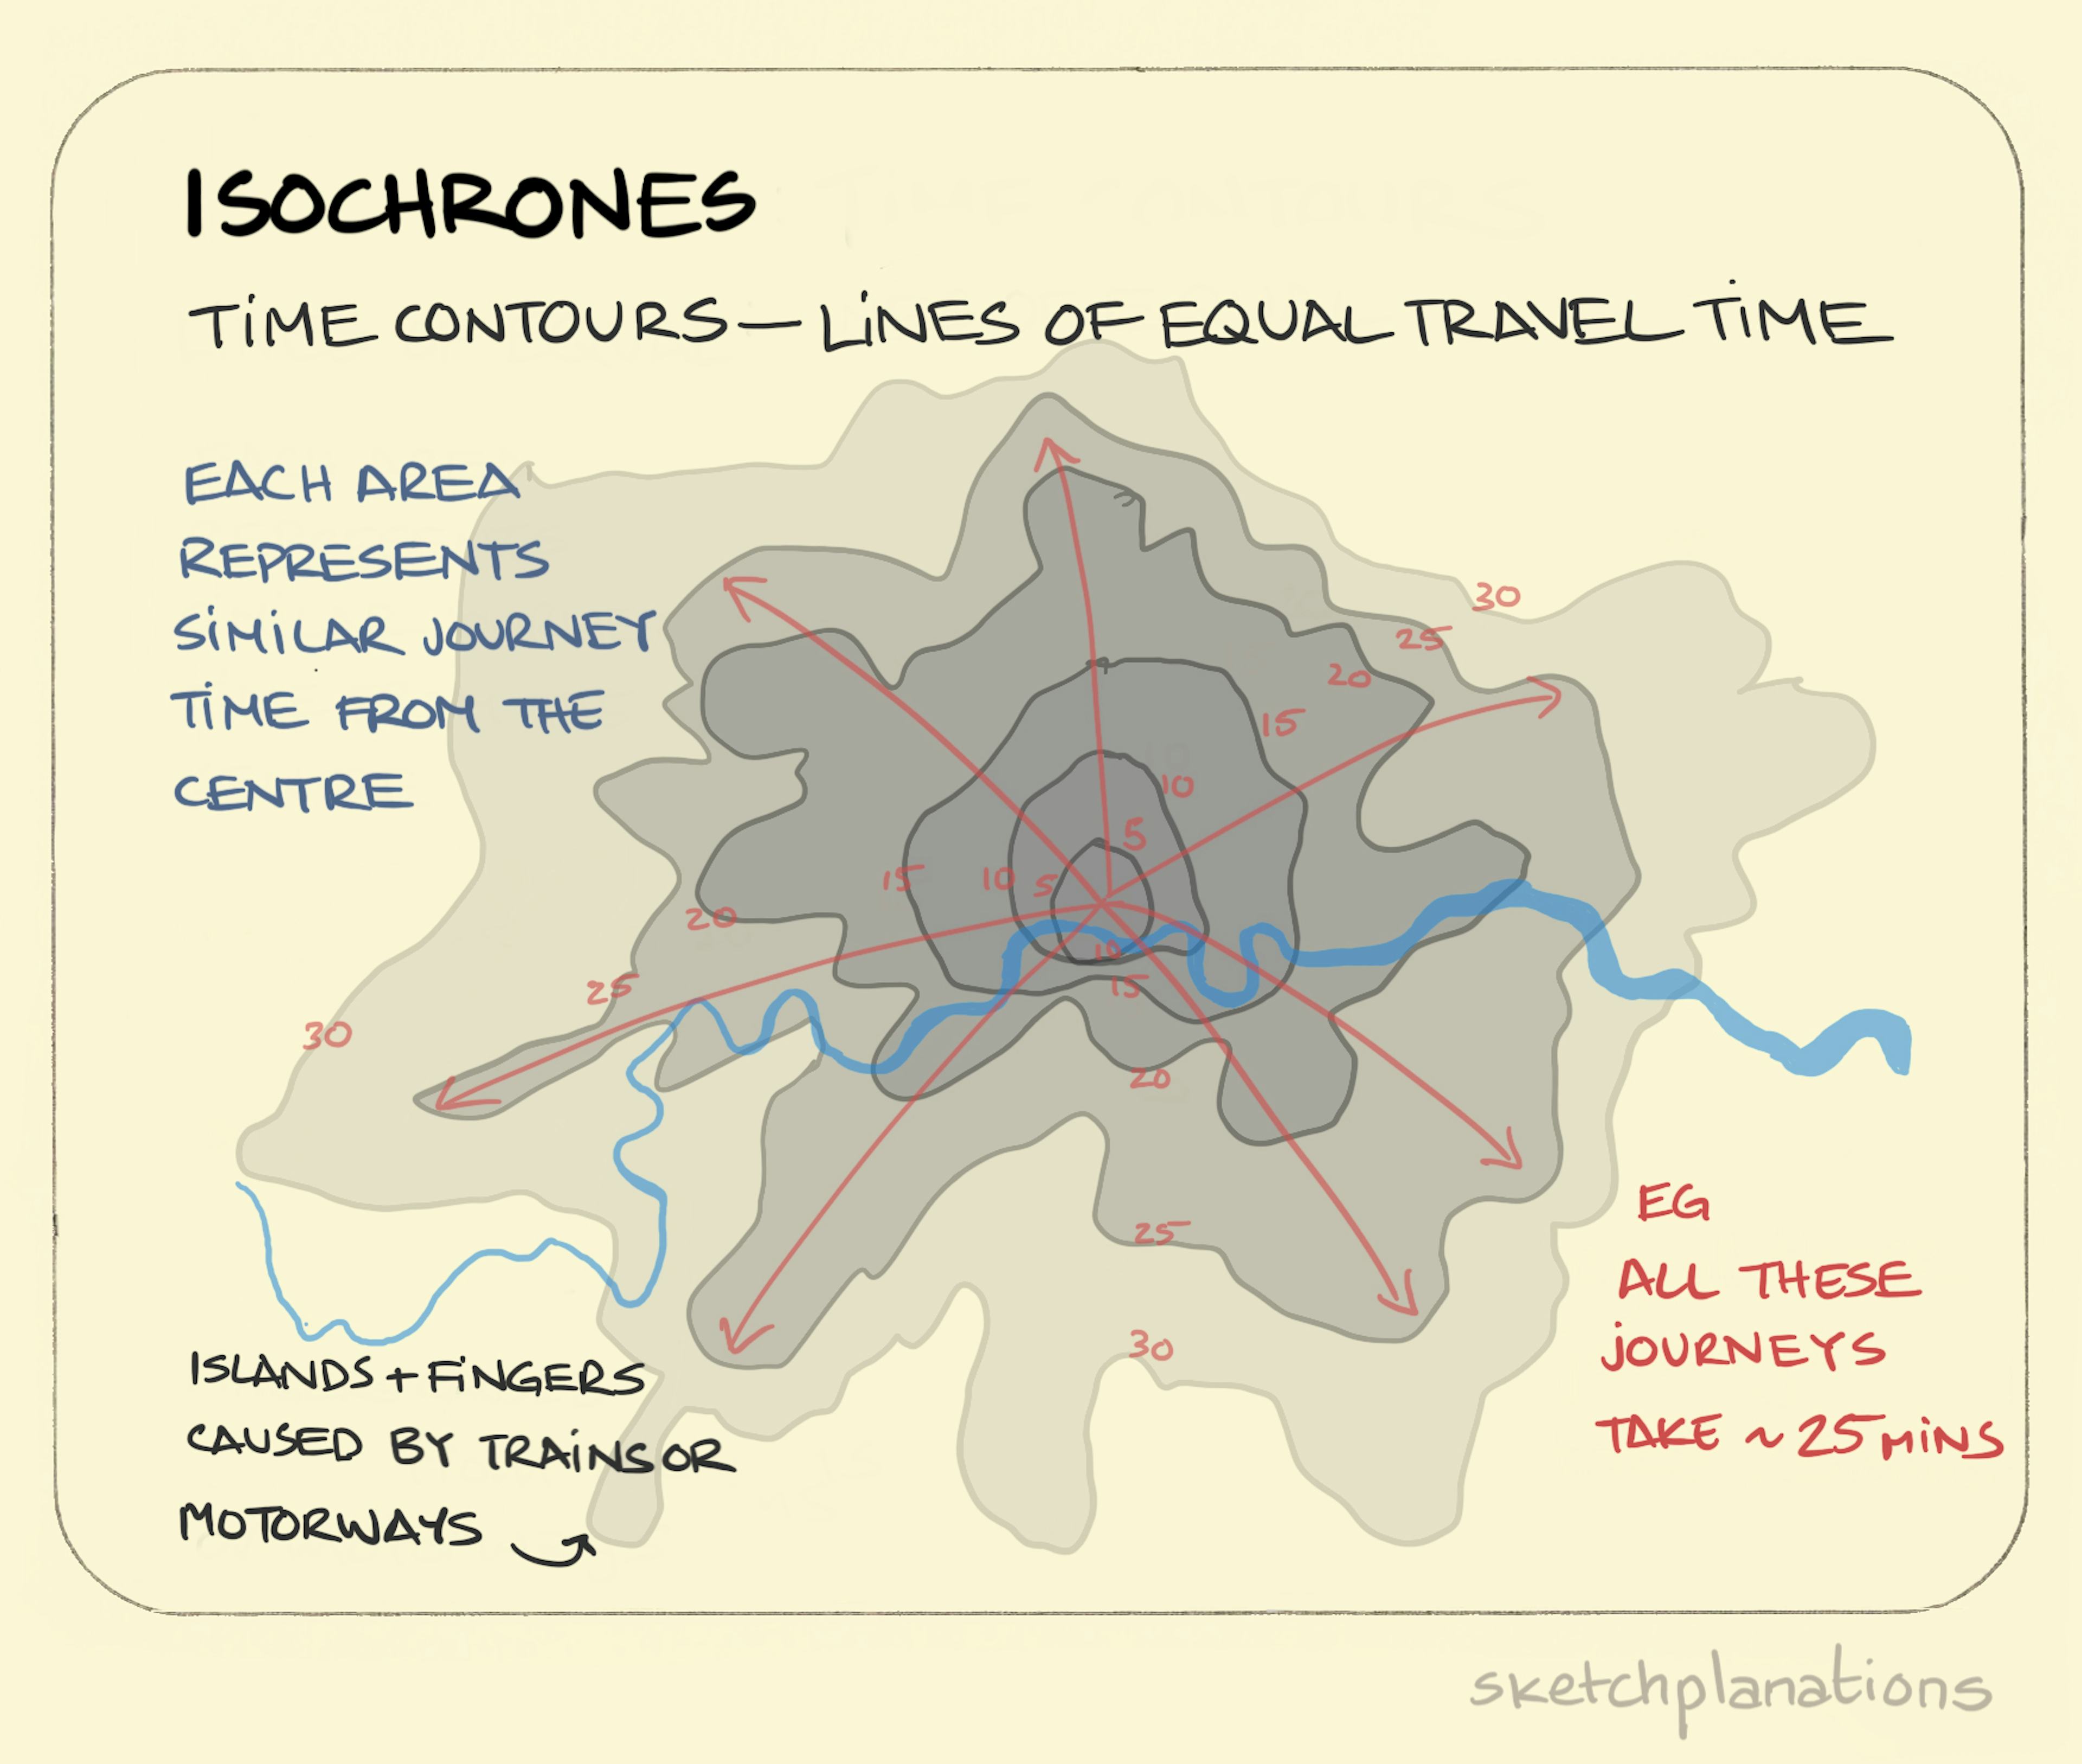 Isochrones illustration: An aerial view of London shows enclosed concentric, but irregular shapes, radiating out from the centre of the city, denoting areas of equal travel time; from 5 minutes to 30 minutes. 